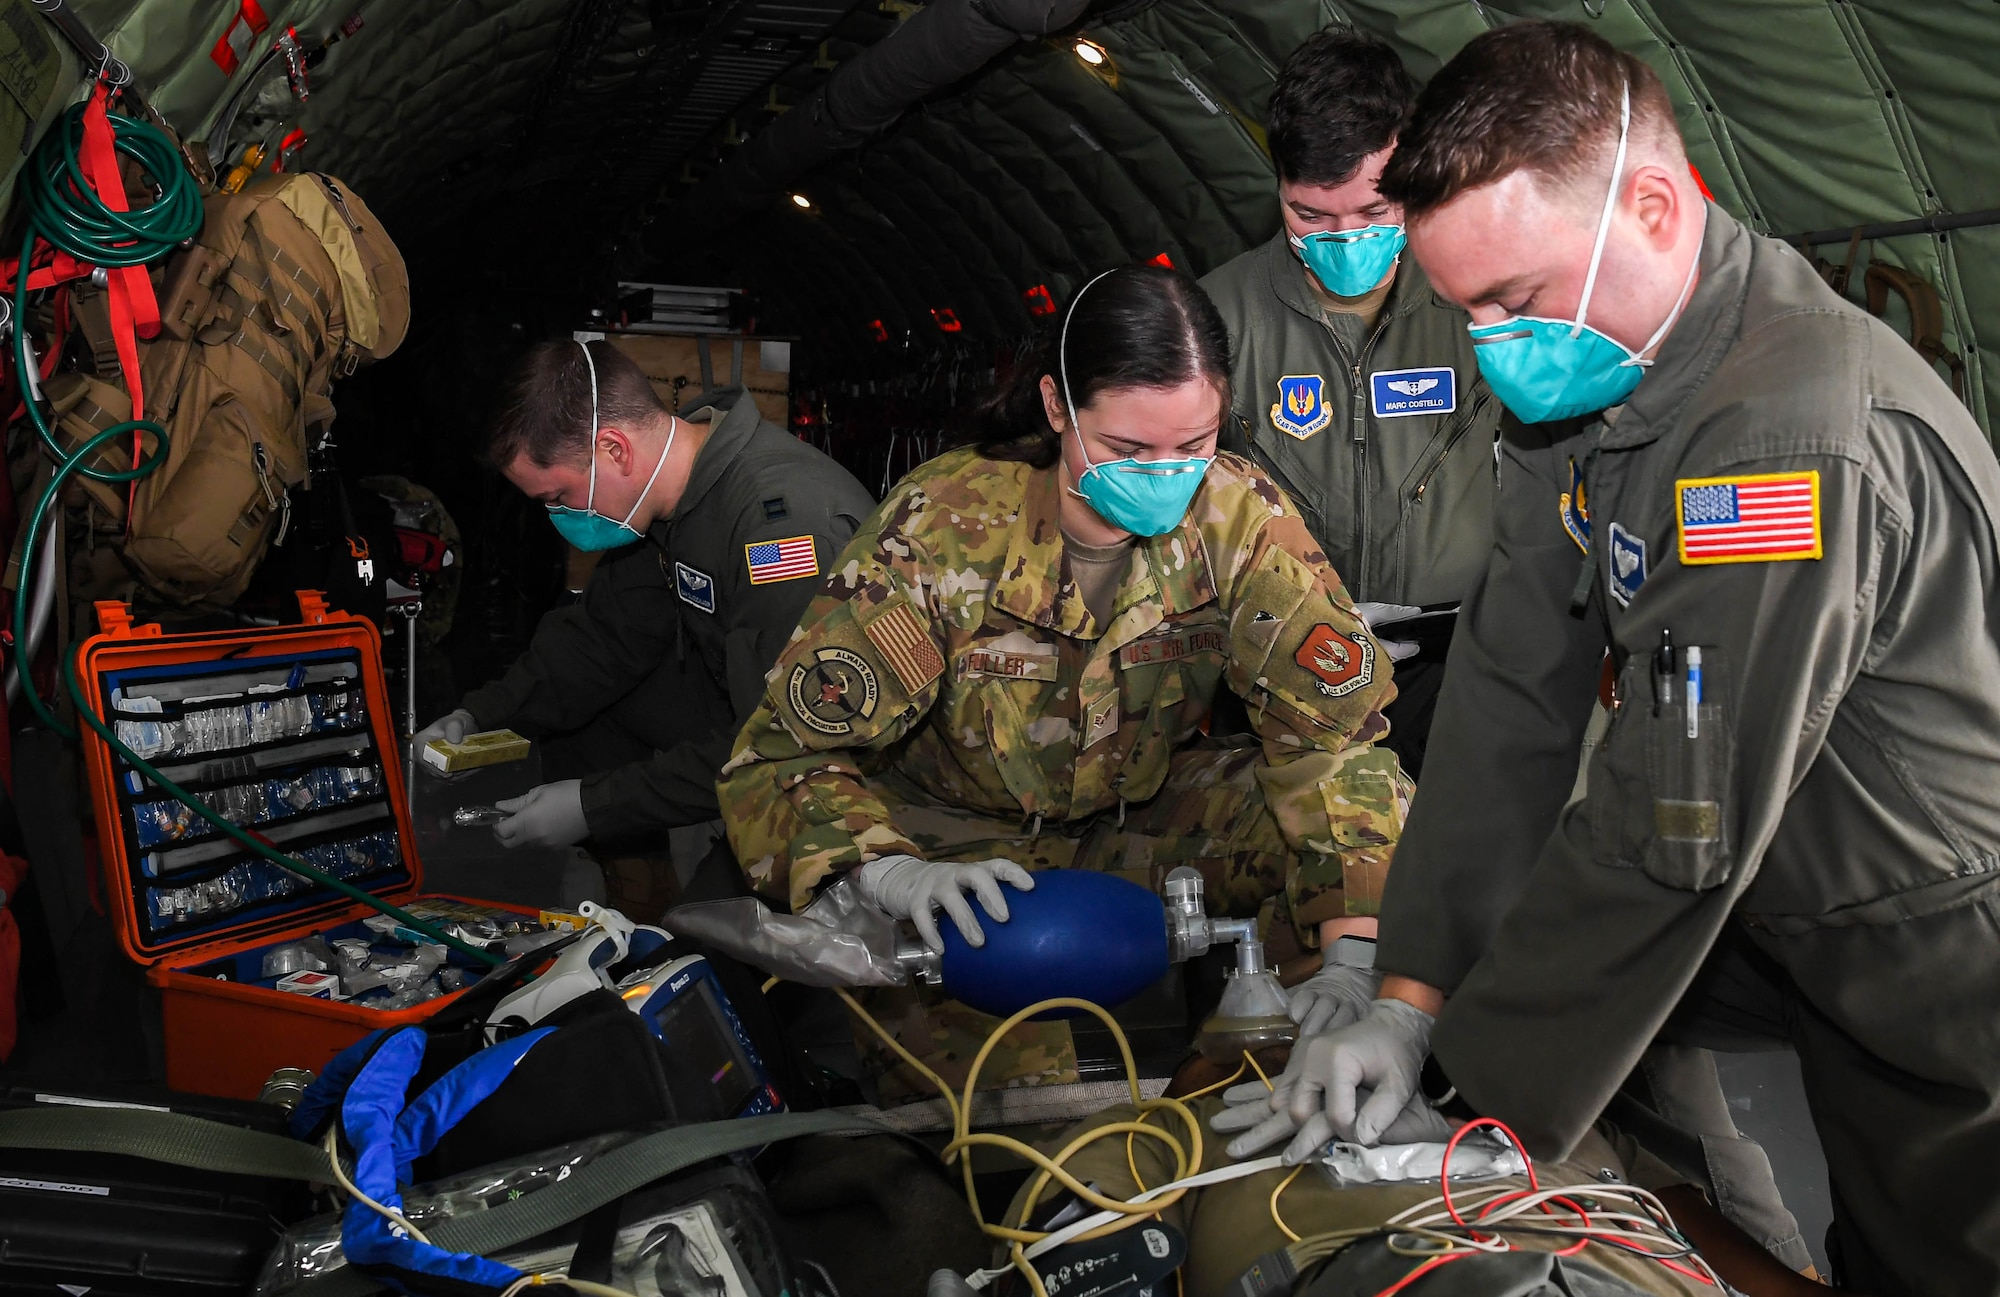 U.S. Air Force Airmen assigned to  the 86th Aeromedical Evacuation Squadron perform advanced life support training at Ramstein Air Base, Germany, March 14, 2022. U.S. Air Force Capt. Adam Olligschlager, left, 86th Airlift Wing plans and programs action officer, was celebrated as Airlifter of the Week March 10, 2022, for his outstanding organization and execution of the Secretary of Defense Dispersal Plan. When Olligschlager isn’t working as an action officer, he assumes regular duties as a flight nurse evaluator at the 86th Aeromedical Evacuation Squadron. (U.S. Air Force photo by Airman 1st Class Jared Lovett)